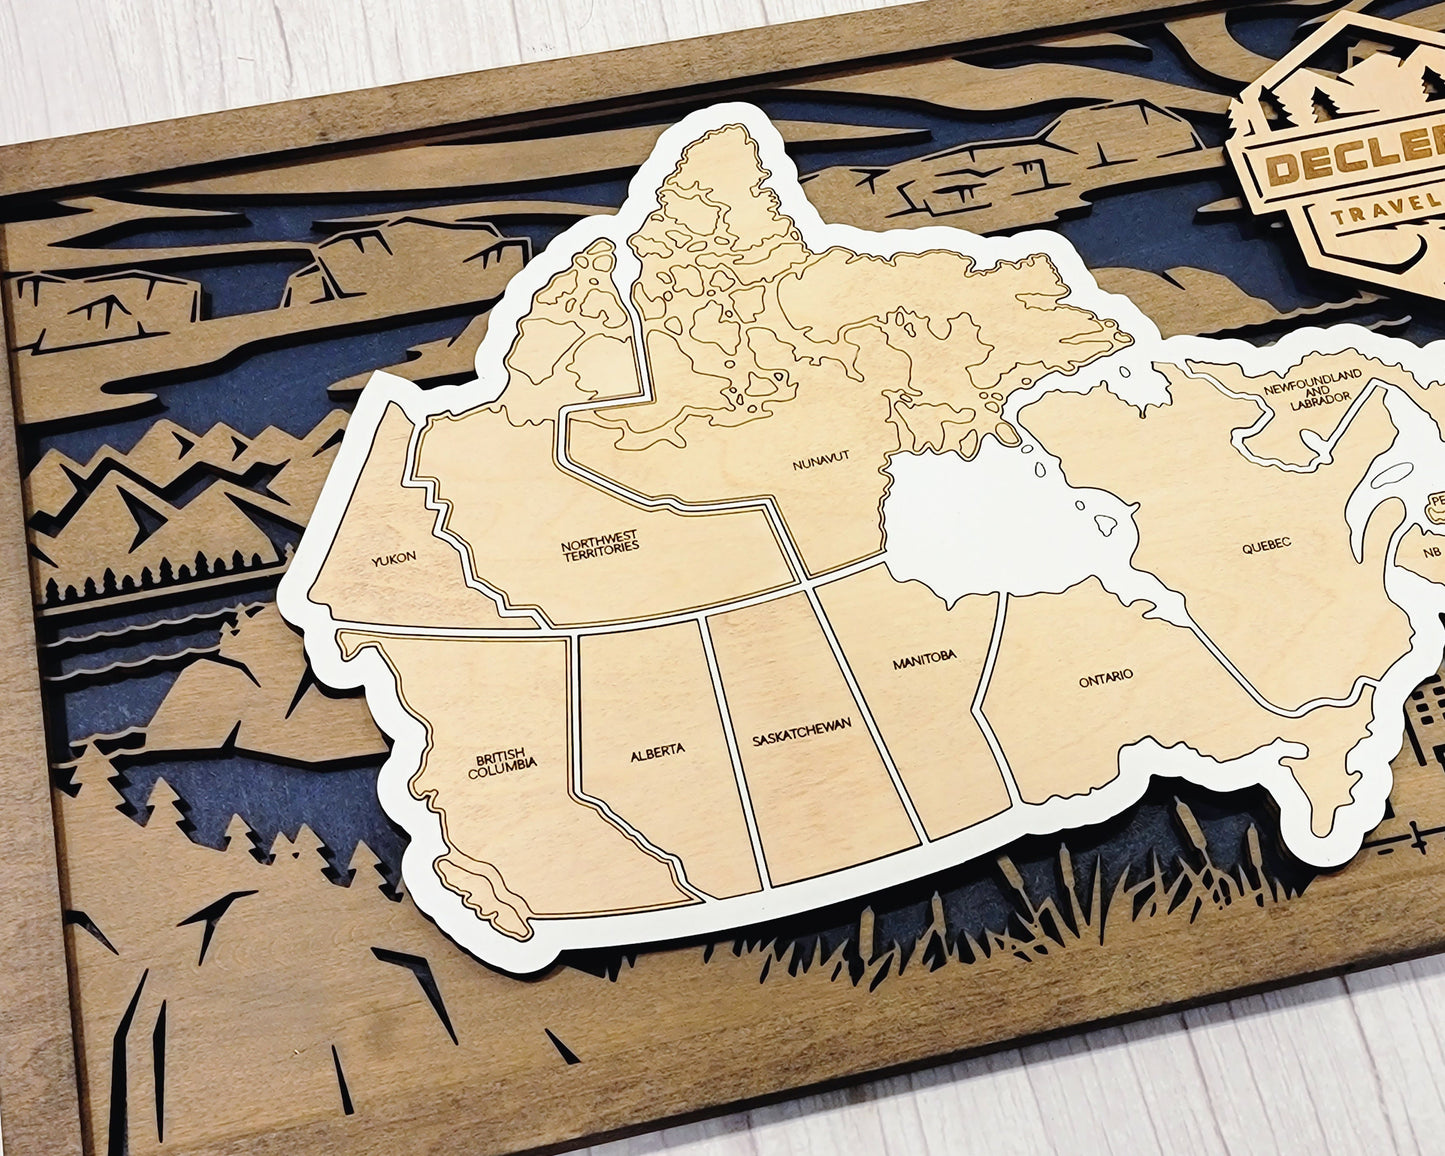 The Homestyle Canadian Travel Map -  3 Backgrounds & 12 Customizable Name Plates - SVG File Download - Sized for Glowforge